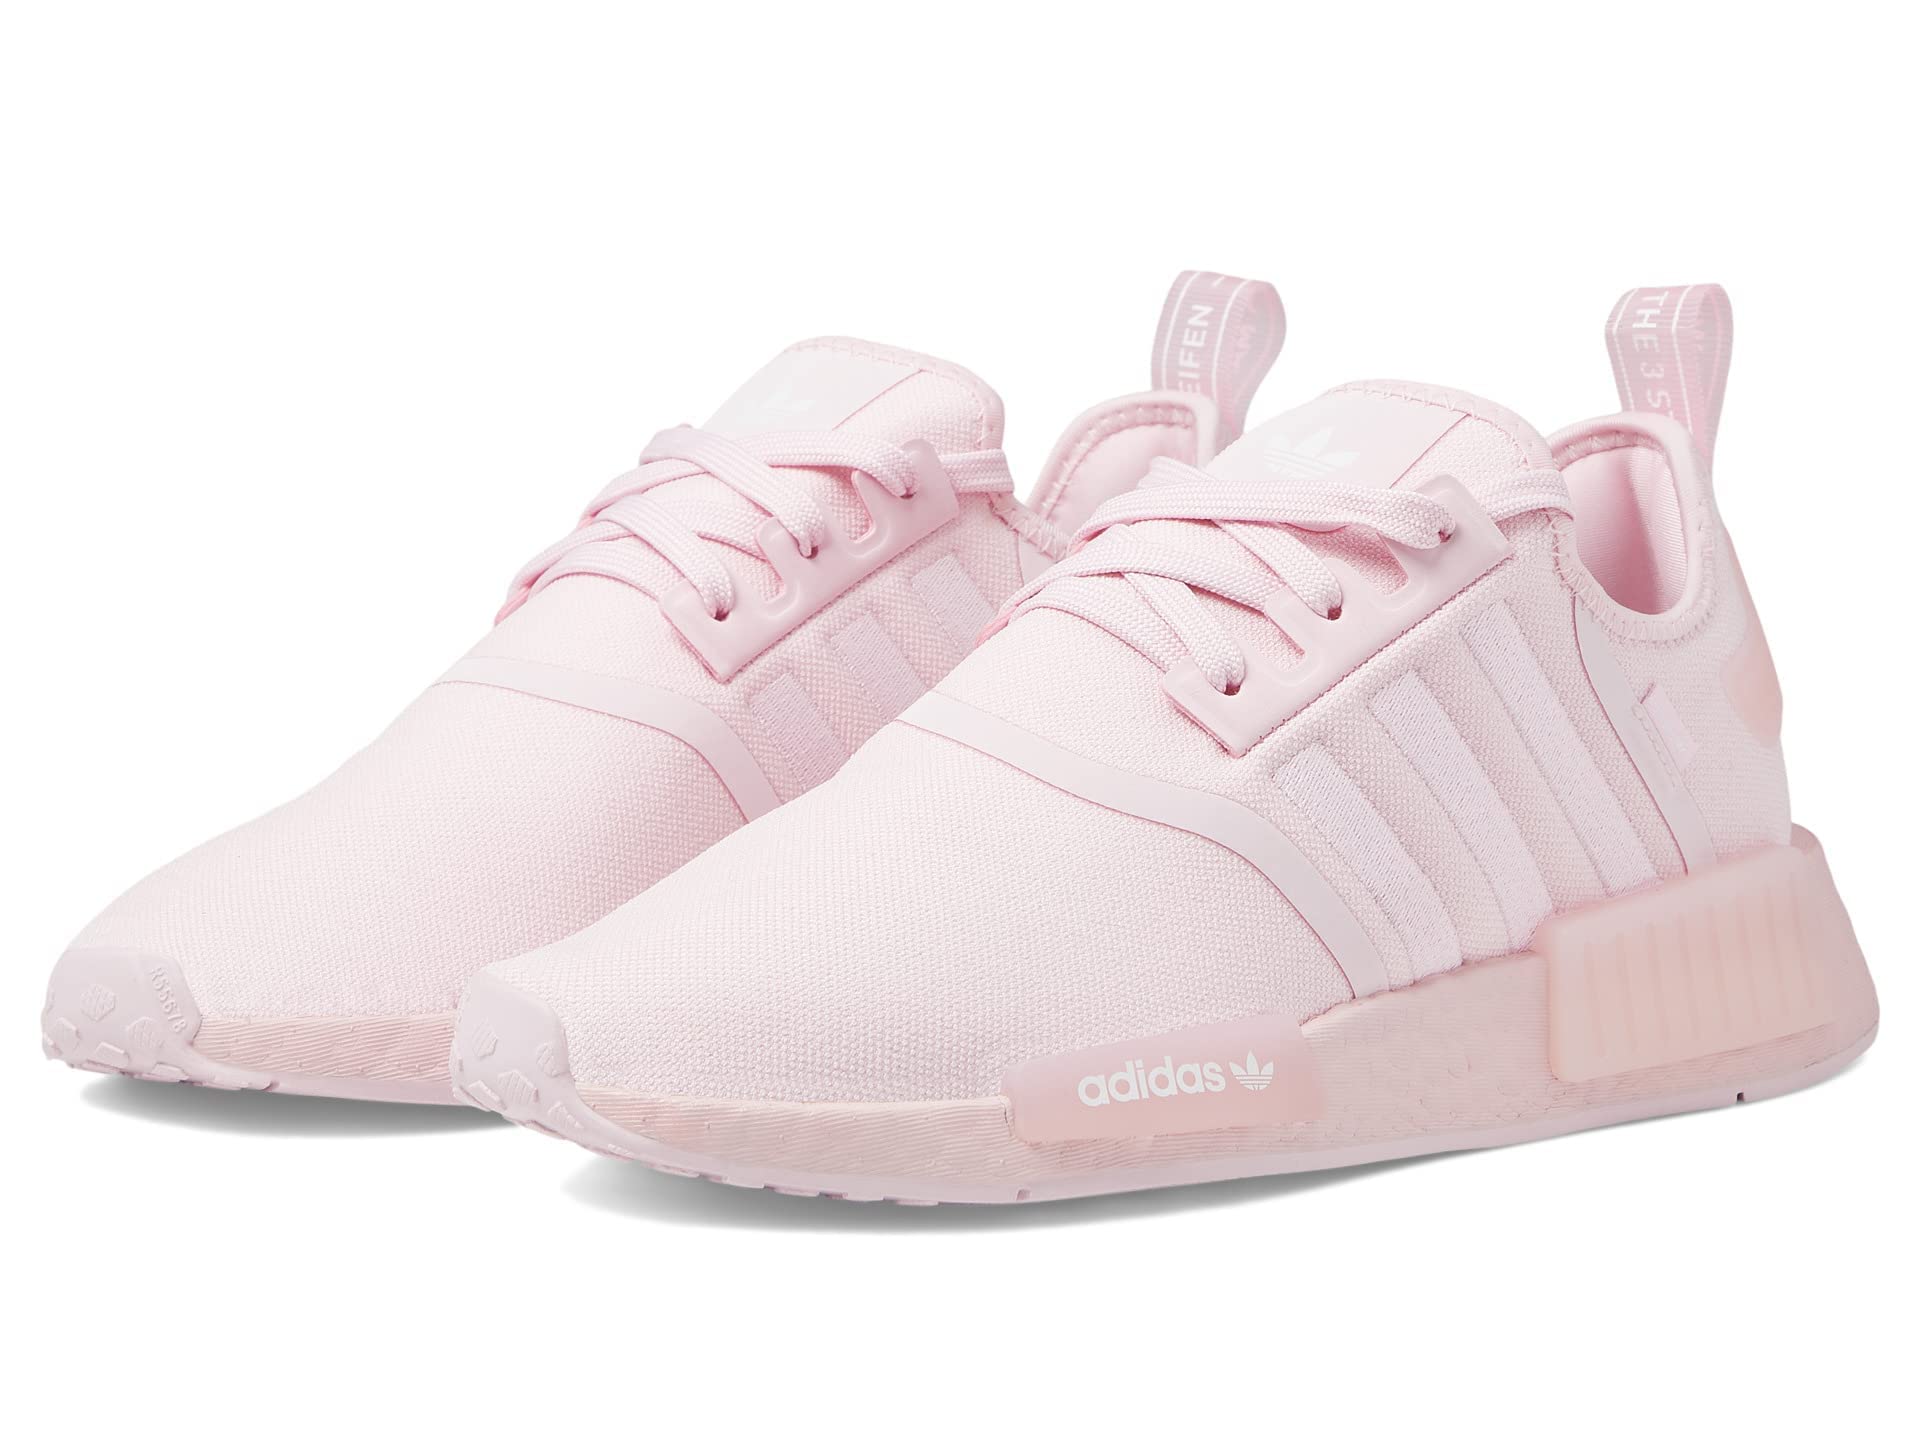 adidas Originals NMD-R1 Clear Pink/Clear Pink/White 9 B (M)